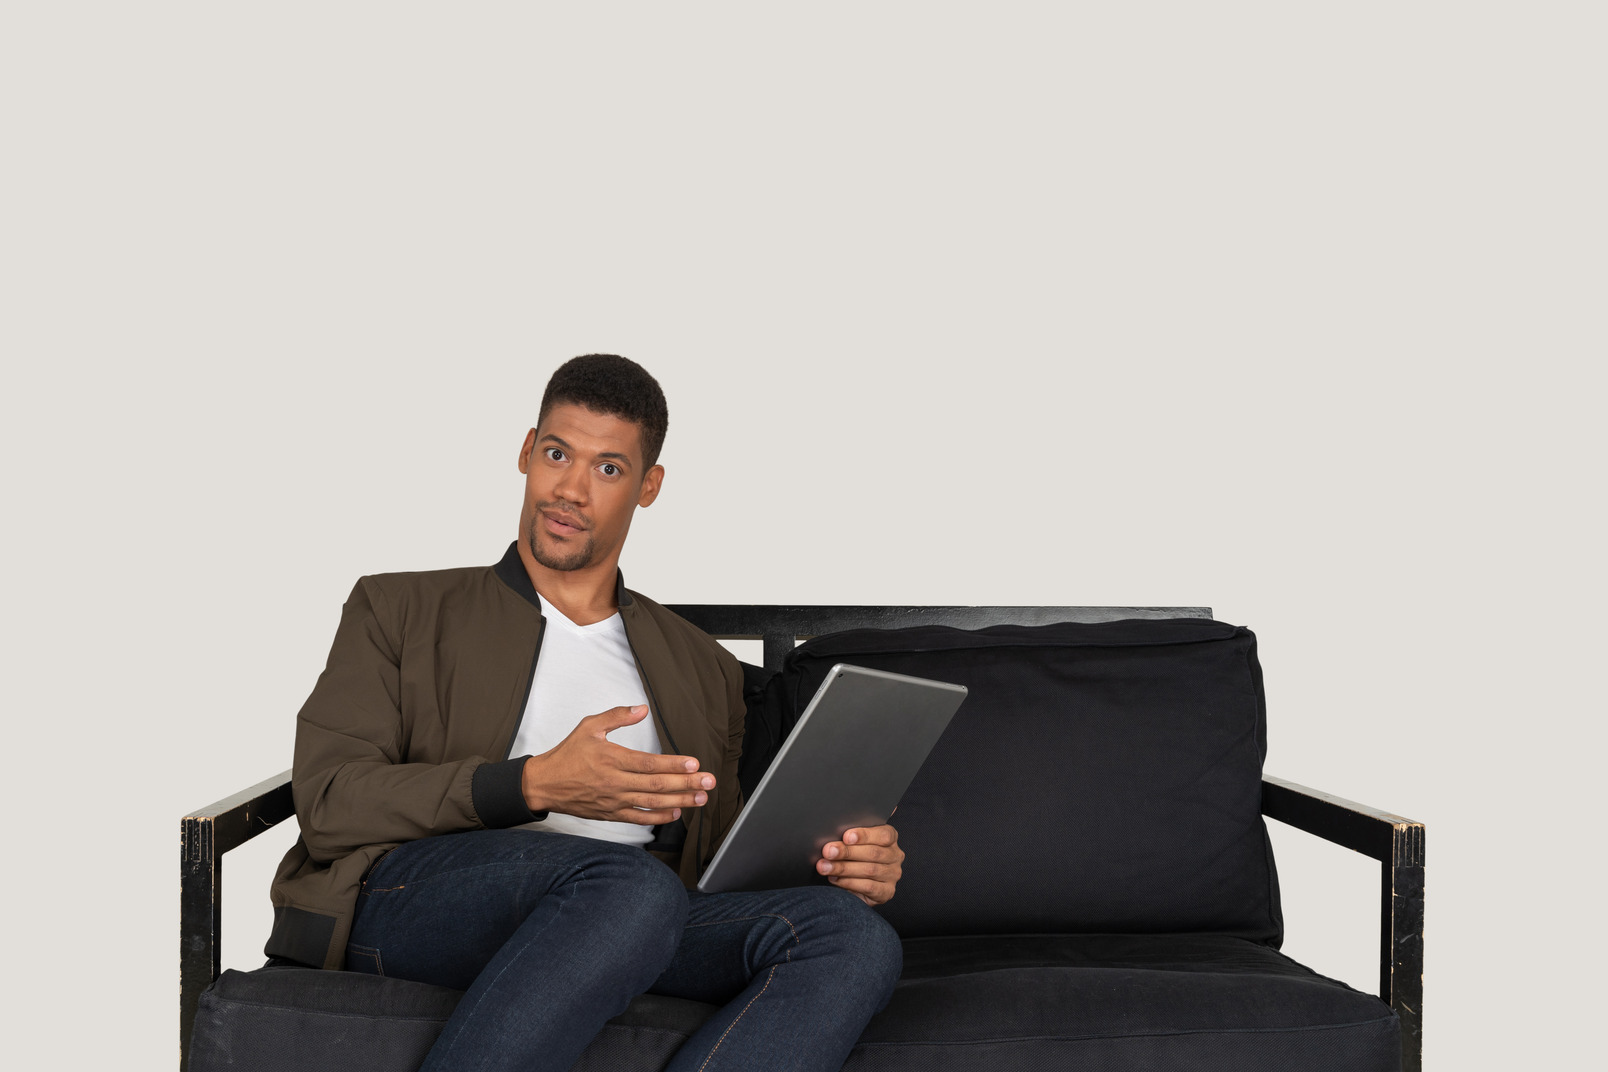 Front view of a shocked young man sitting on a sofa while watching the tablet